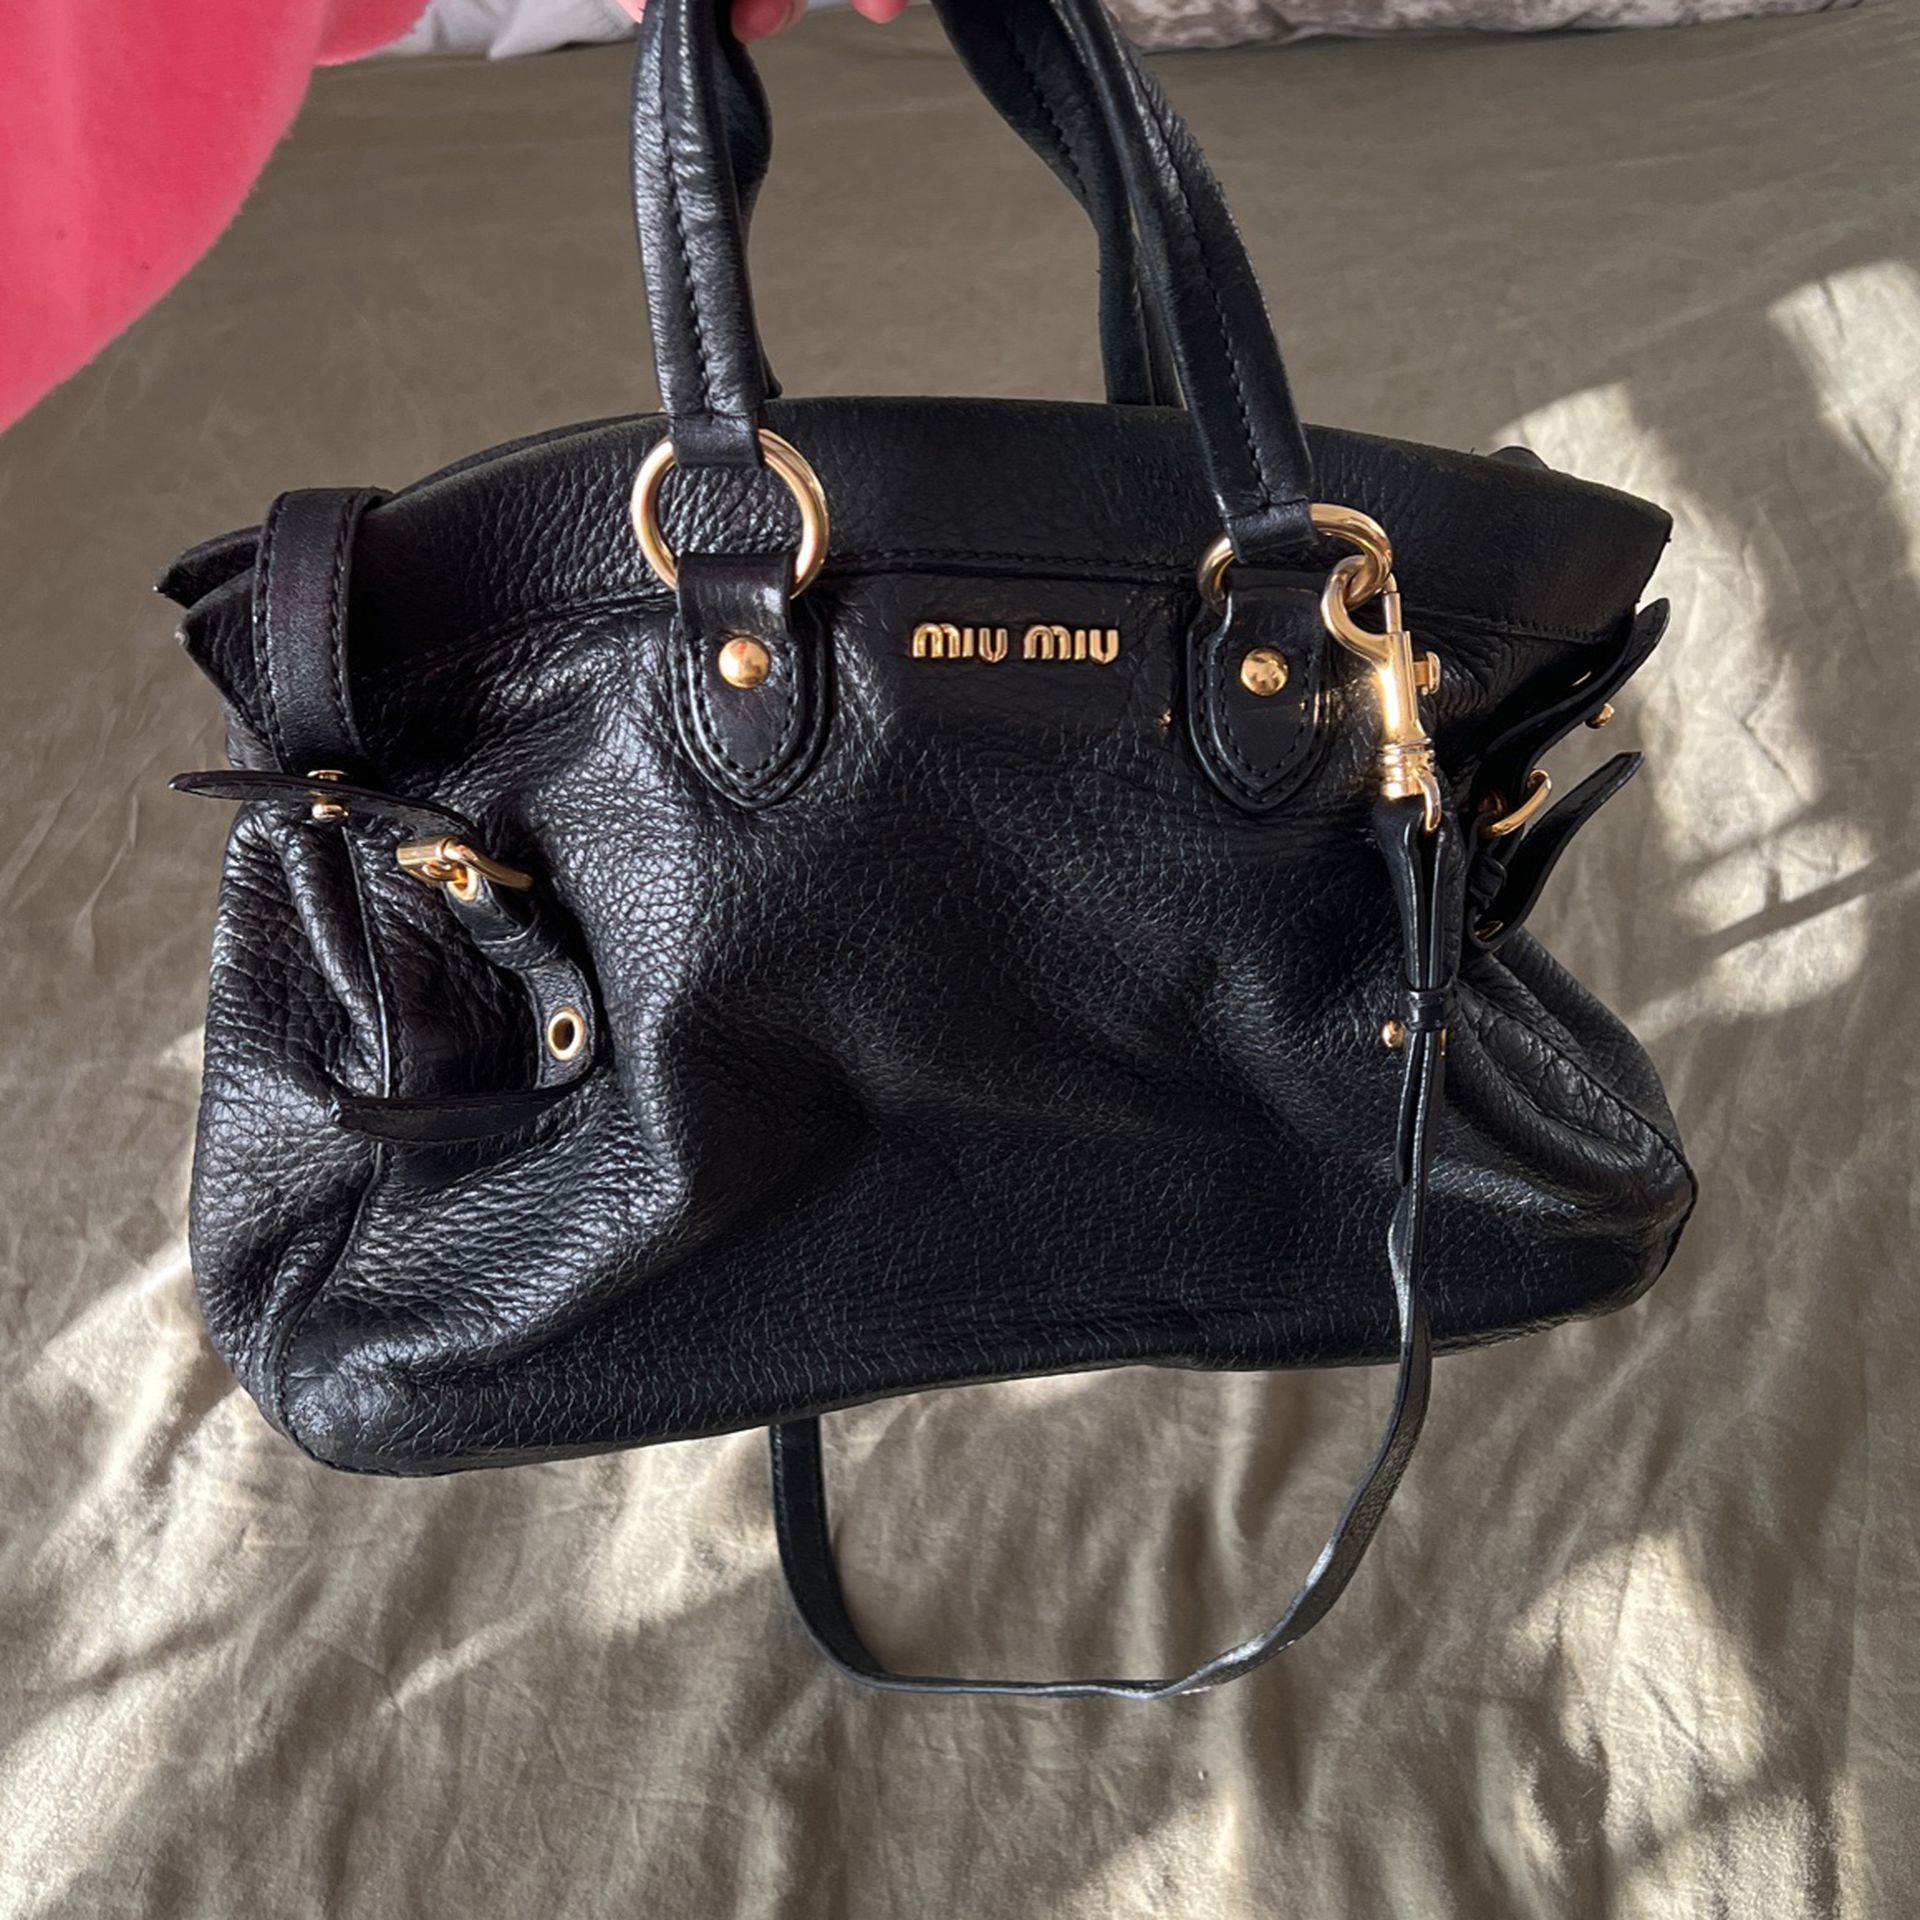 Preowned MIU MIU Leather Handbag 2 Way for Sale in Enfield, CT - OfferUp